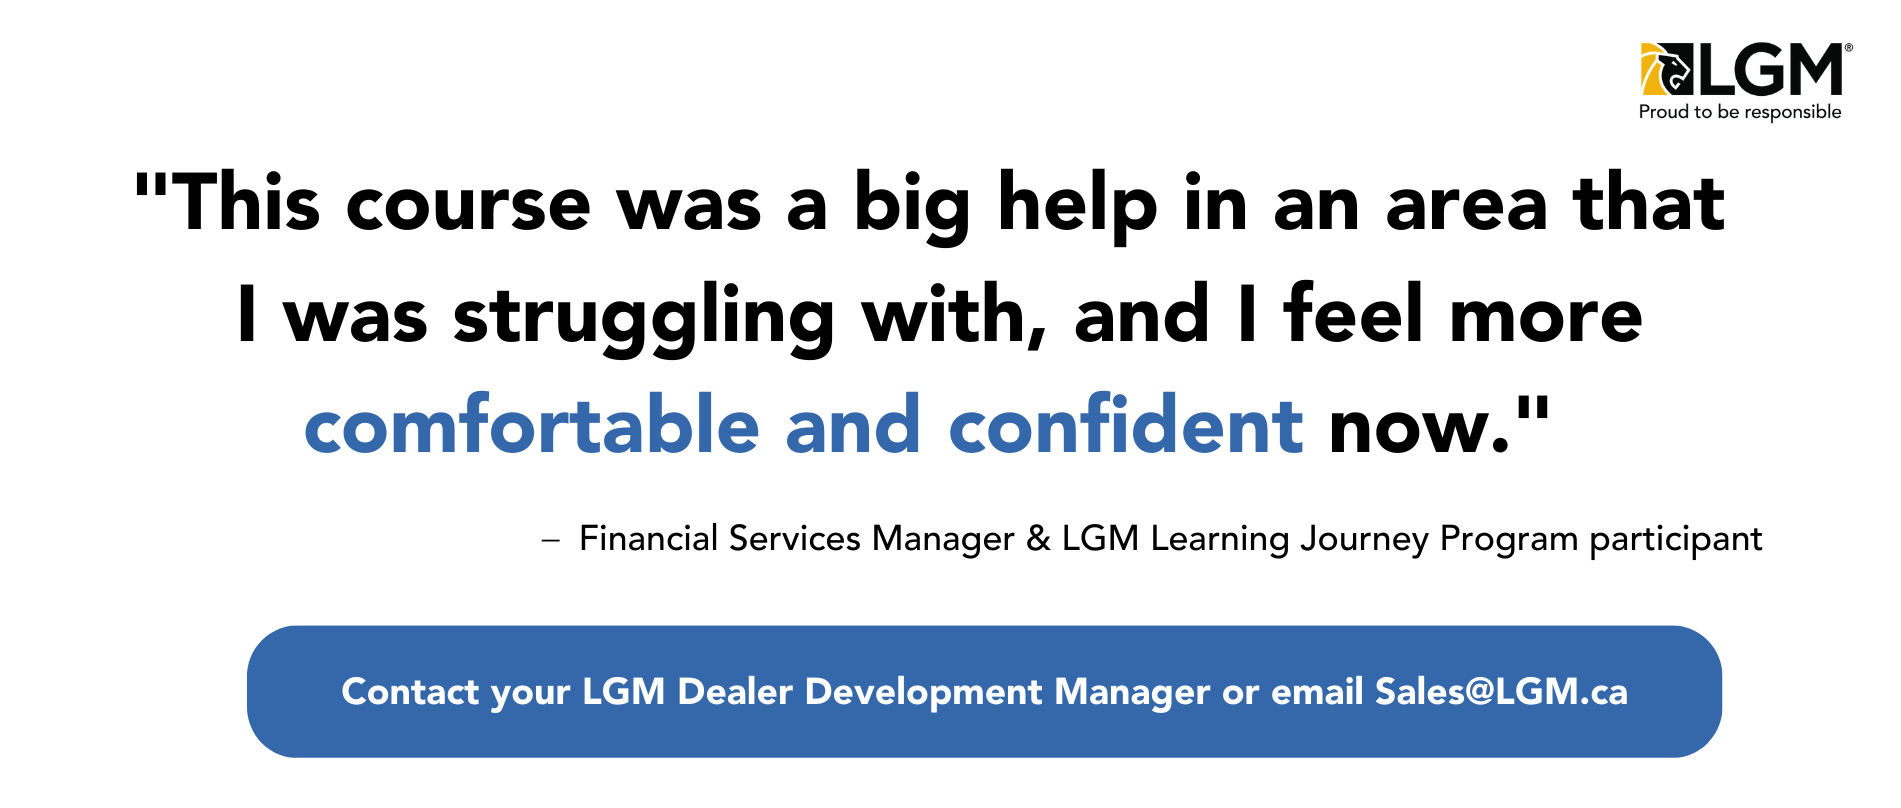 "This course was a big help in an area that I was struggling with, and I feel more comfortable and confident now." Contact your local LGM Dealer Development Manager or email Sales@lgm.ca for more information on how to enroll.